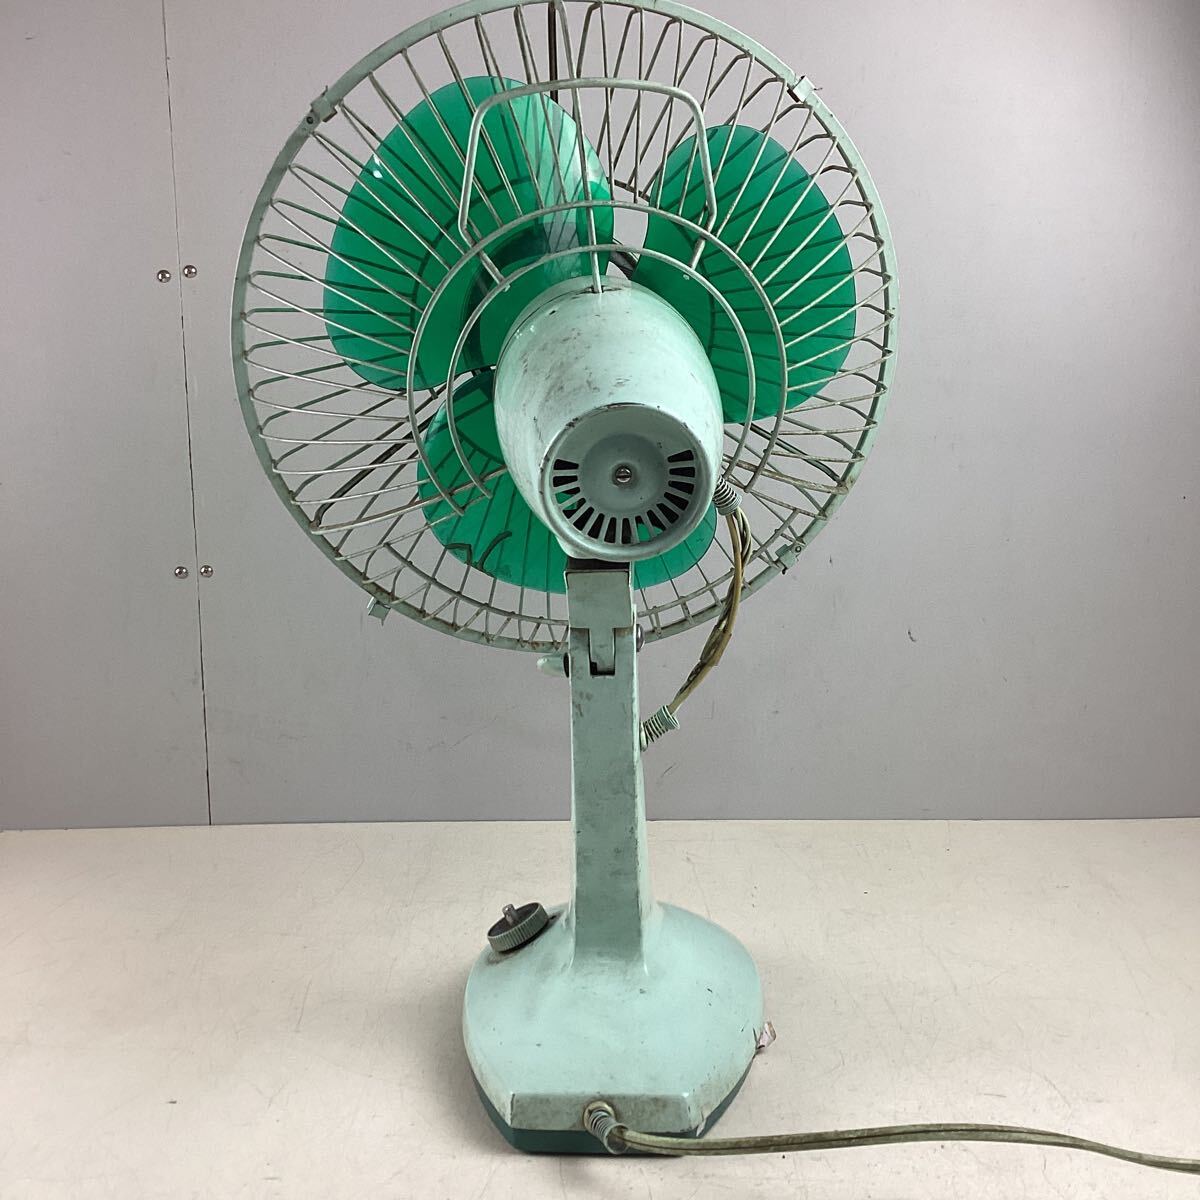 k5120 Mitsubishi electric fan D-30NH Showa Retro 30cm standard .NH green MMC that time thing antique Vintage electrical appliances operation verification settled used 